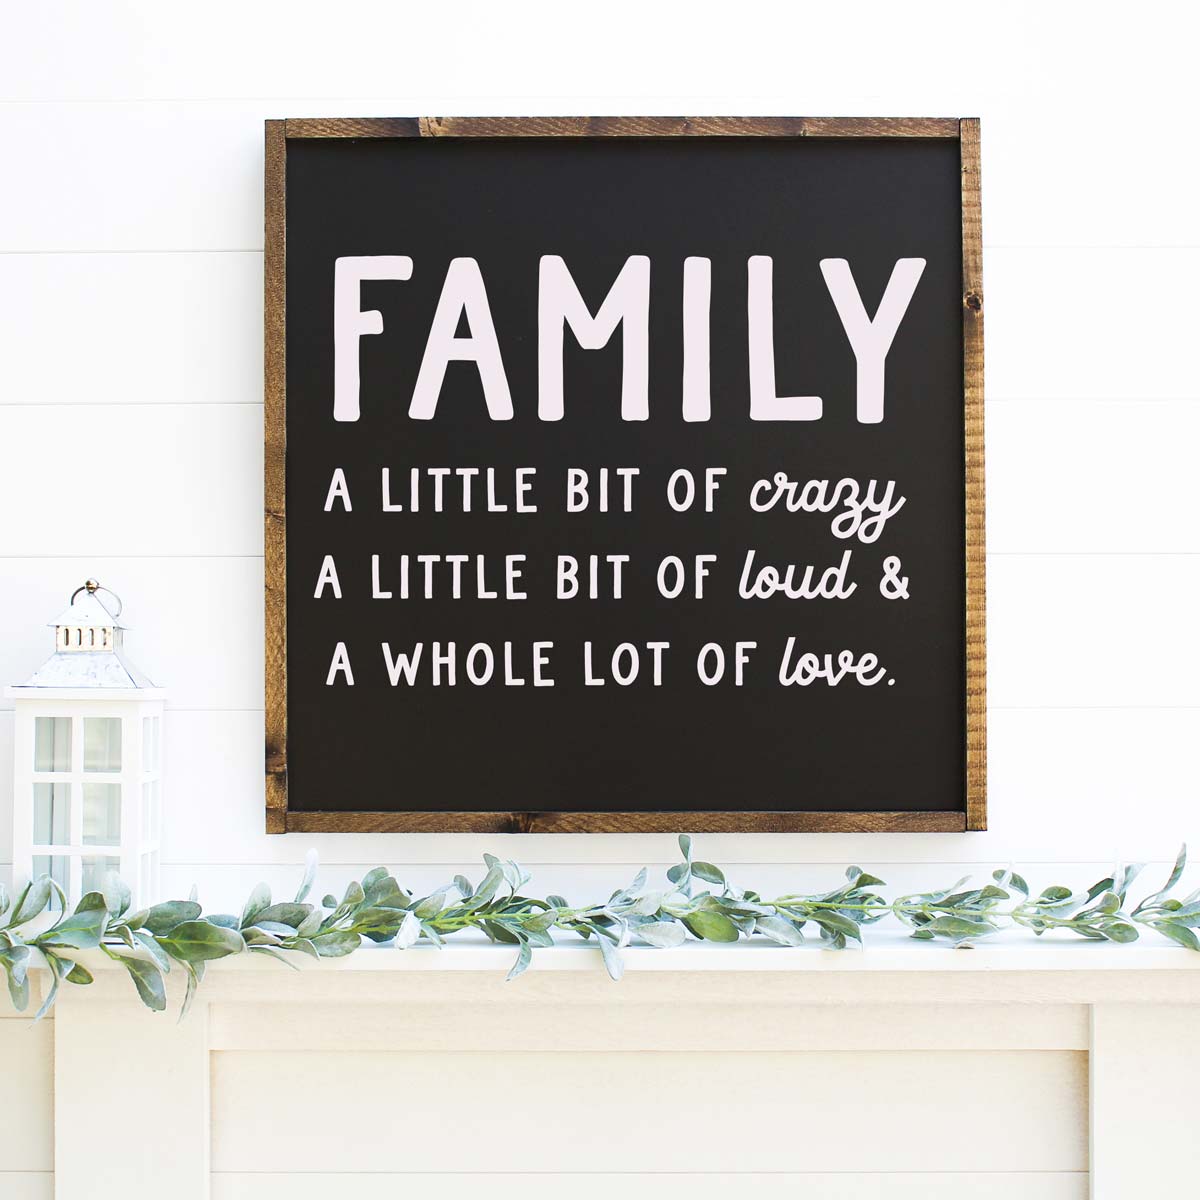 Lot of Love Family Sign by Weekend Crafts